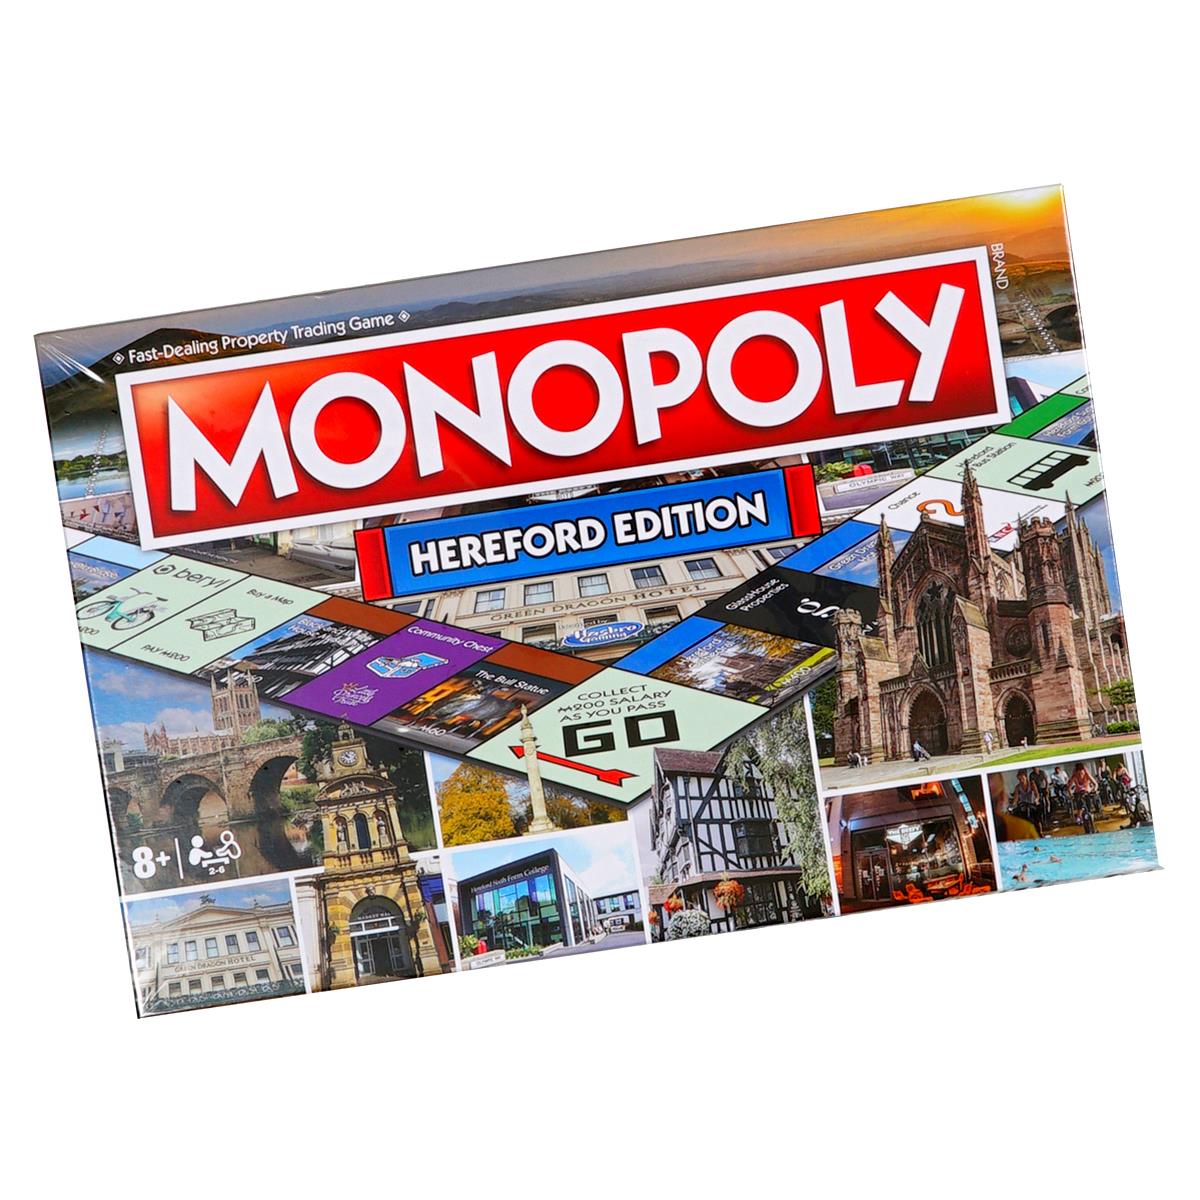 Is Hereford included in the Hereford Monopoly game edition?